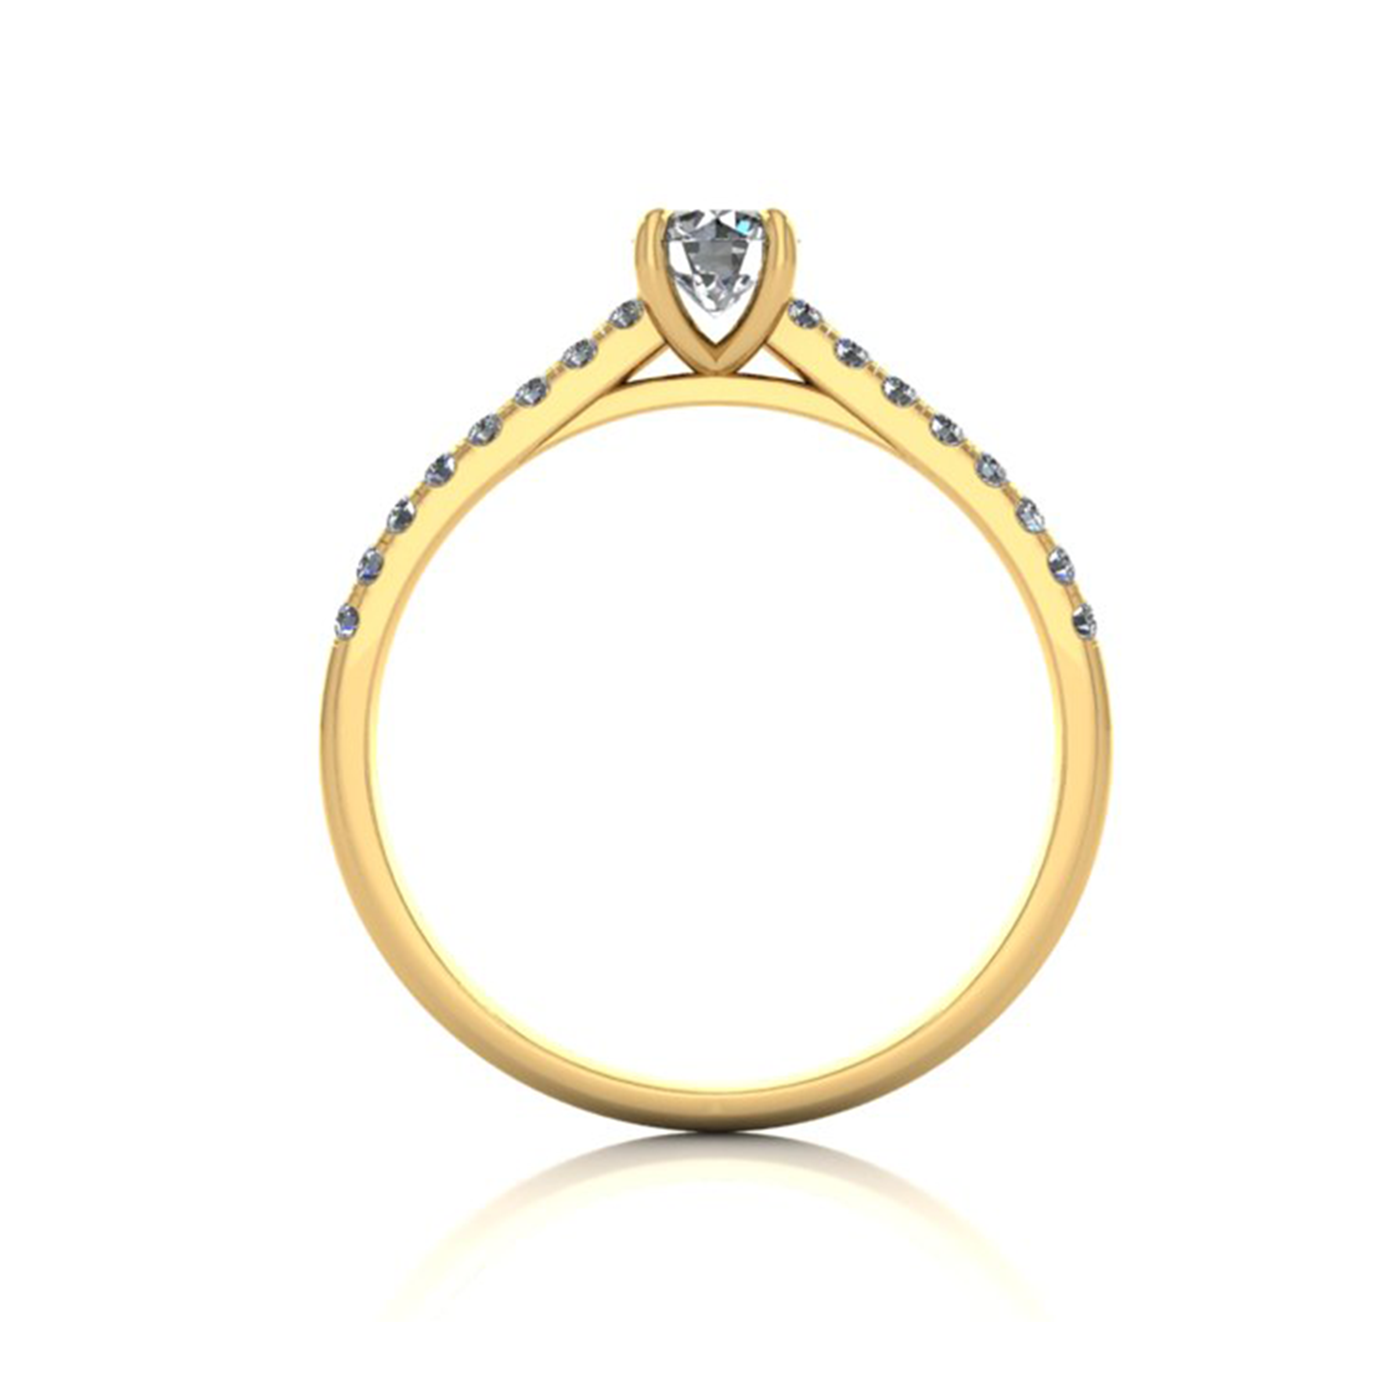 18k yellow gold  0,30 ct 4 prongs round cut diamond engagement ring with whisper thin pavÉ set band